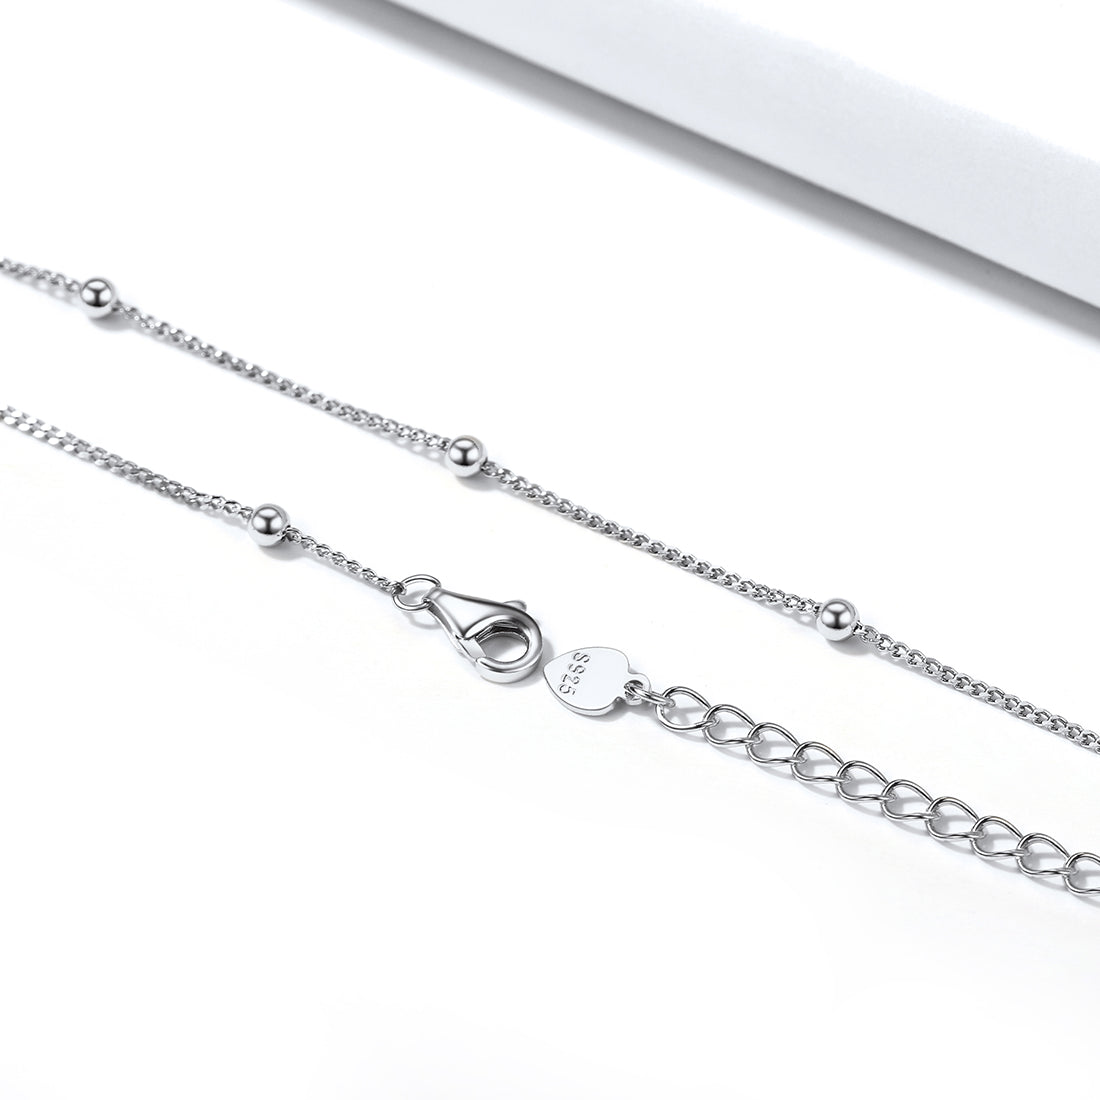 925 Sterling Silver Bead Chain Anklet For Women